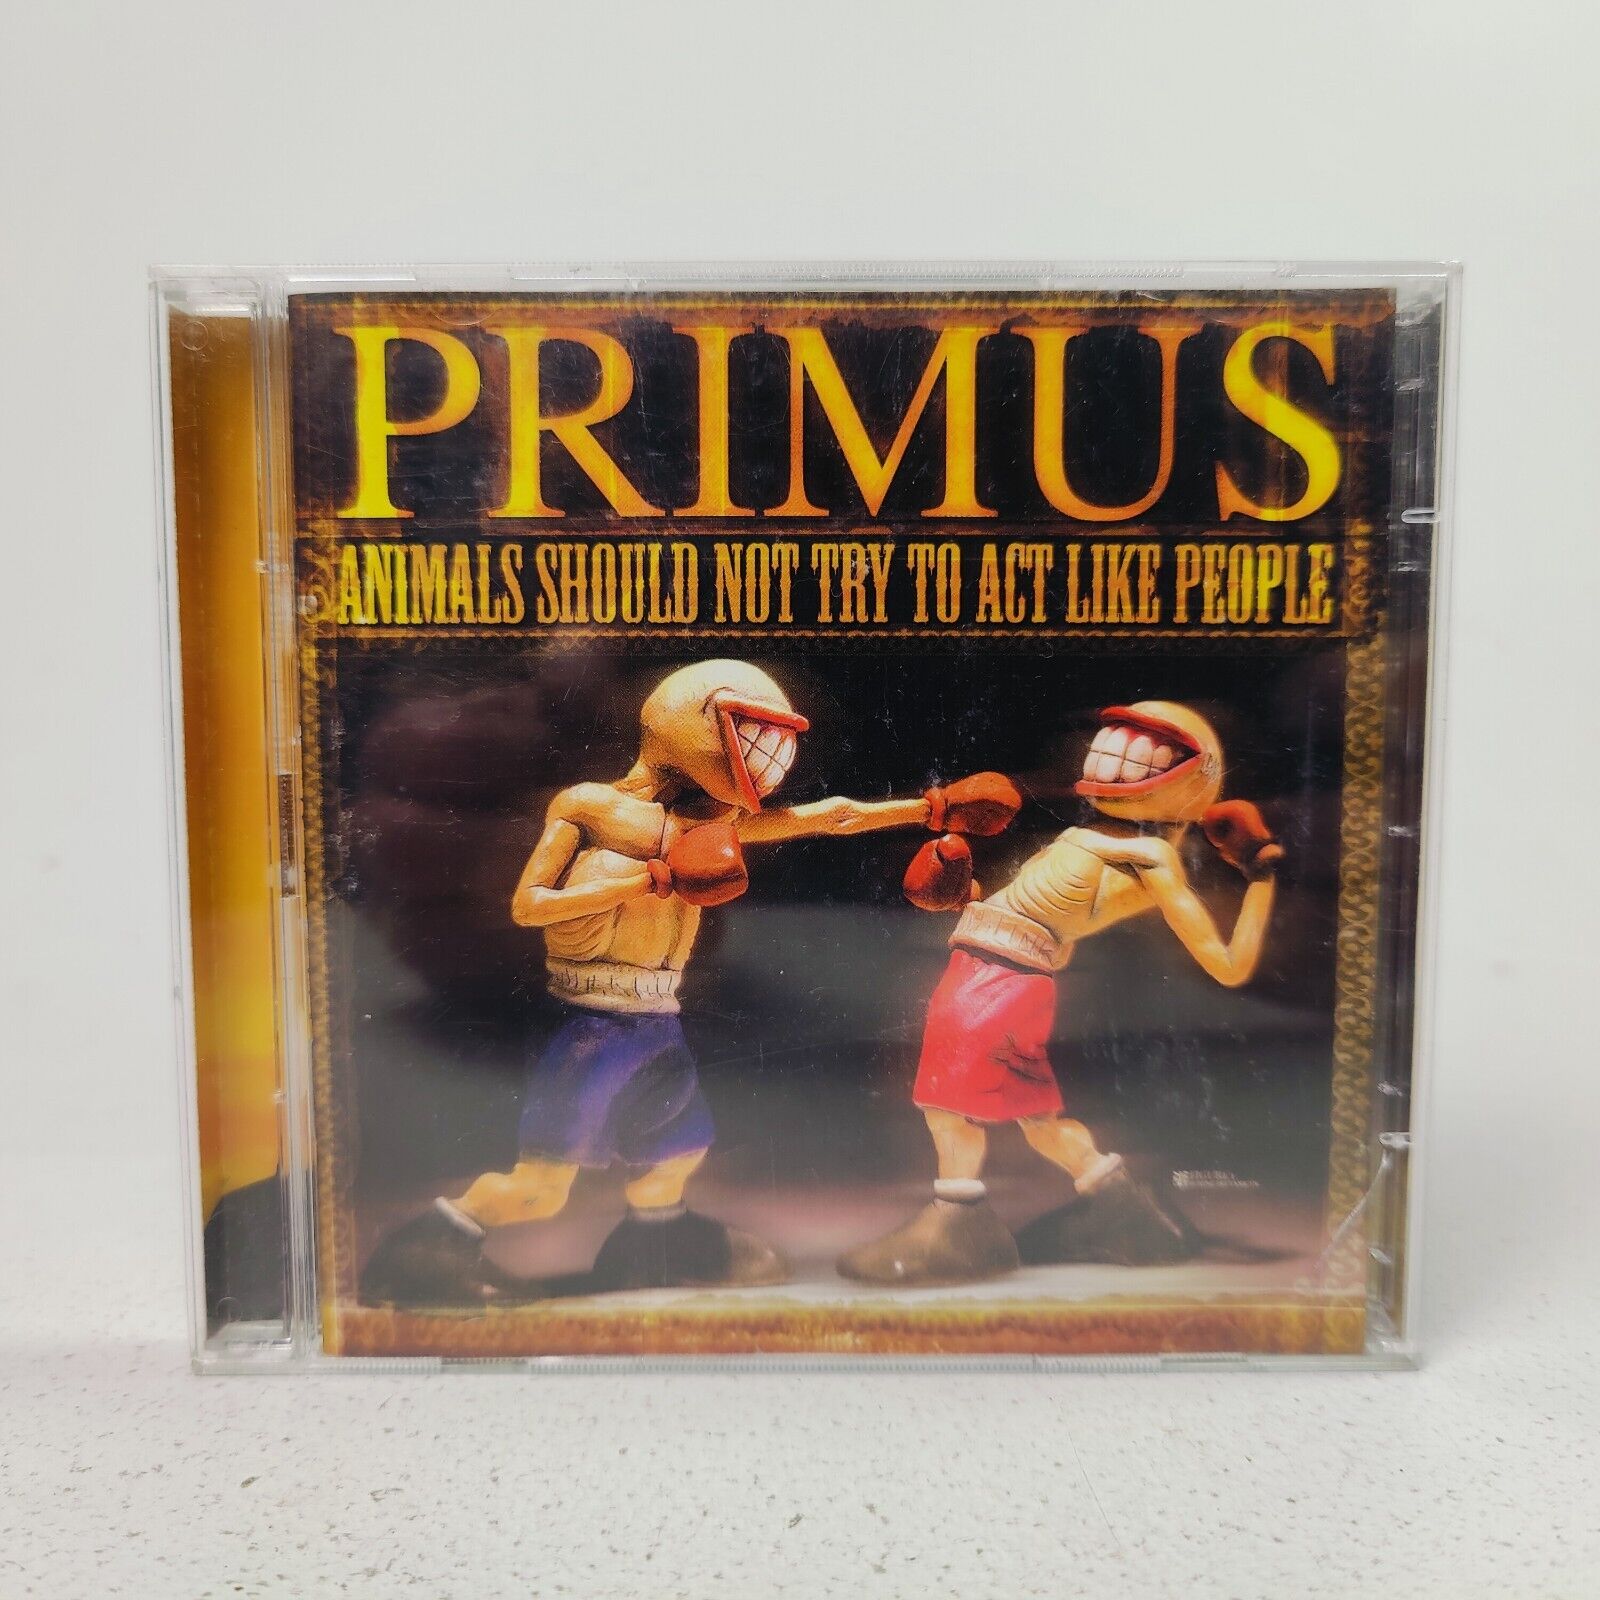 Primus - Animals Should Not Try To Act Like People (CD + DVD) Alt Rock 2003 VG+